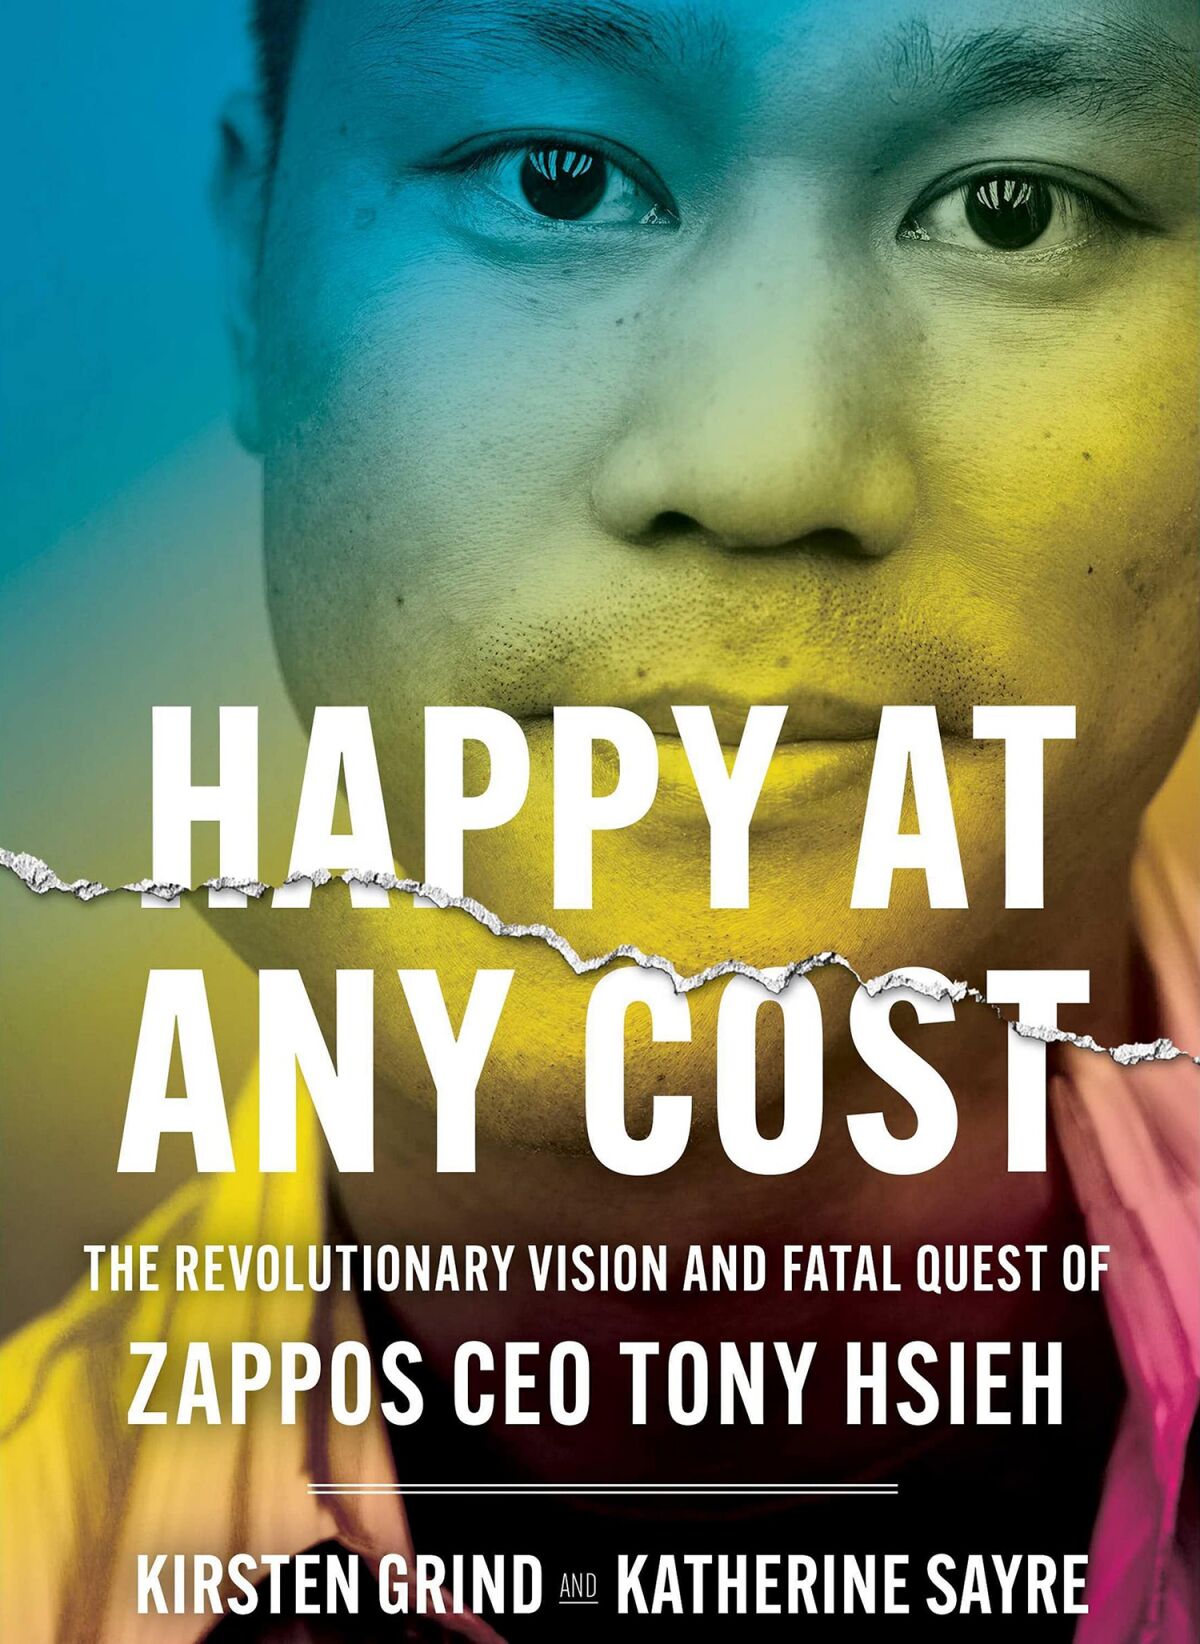 "Happy at Any Cost," about former Zappos CEO Tony Hsieh